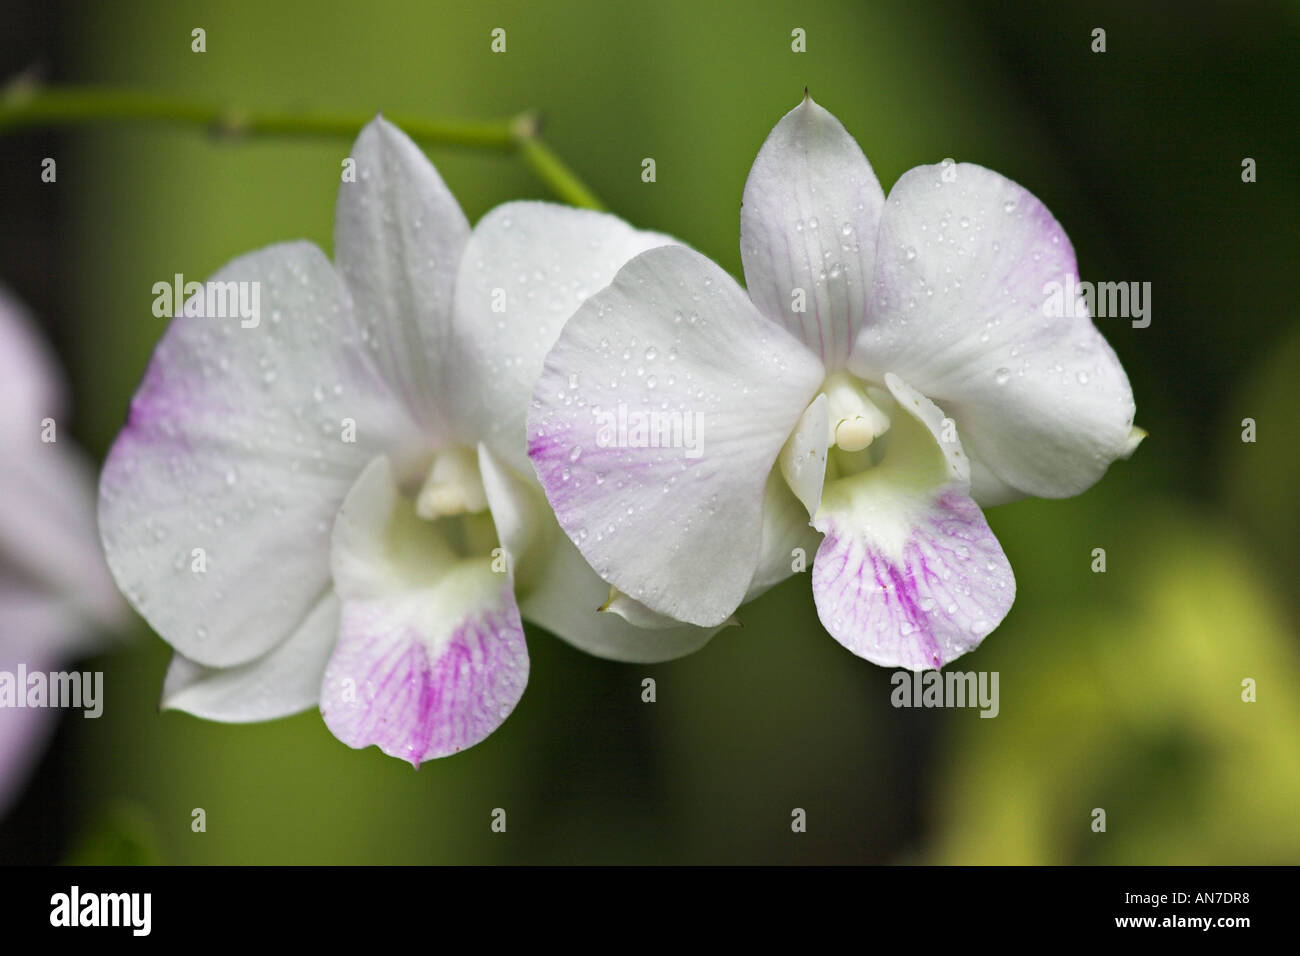 Two white and purple orchids against a bright green background Stock Photo